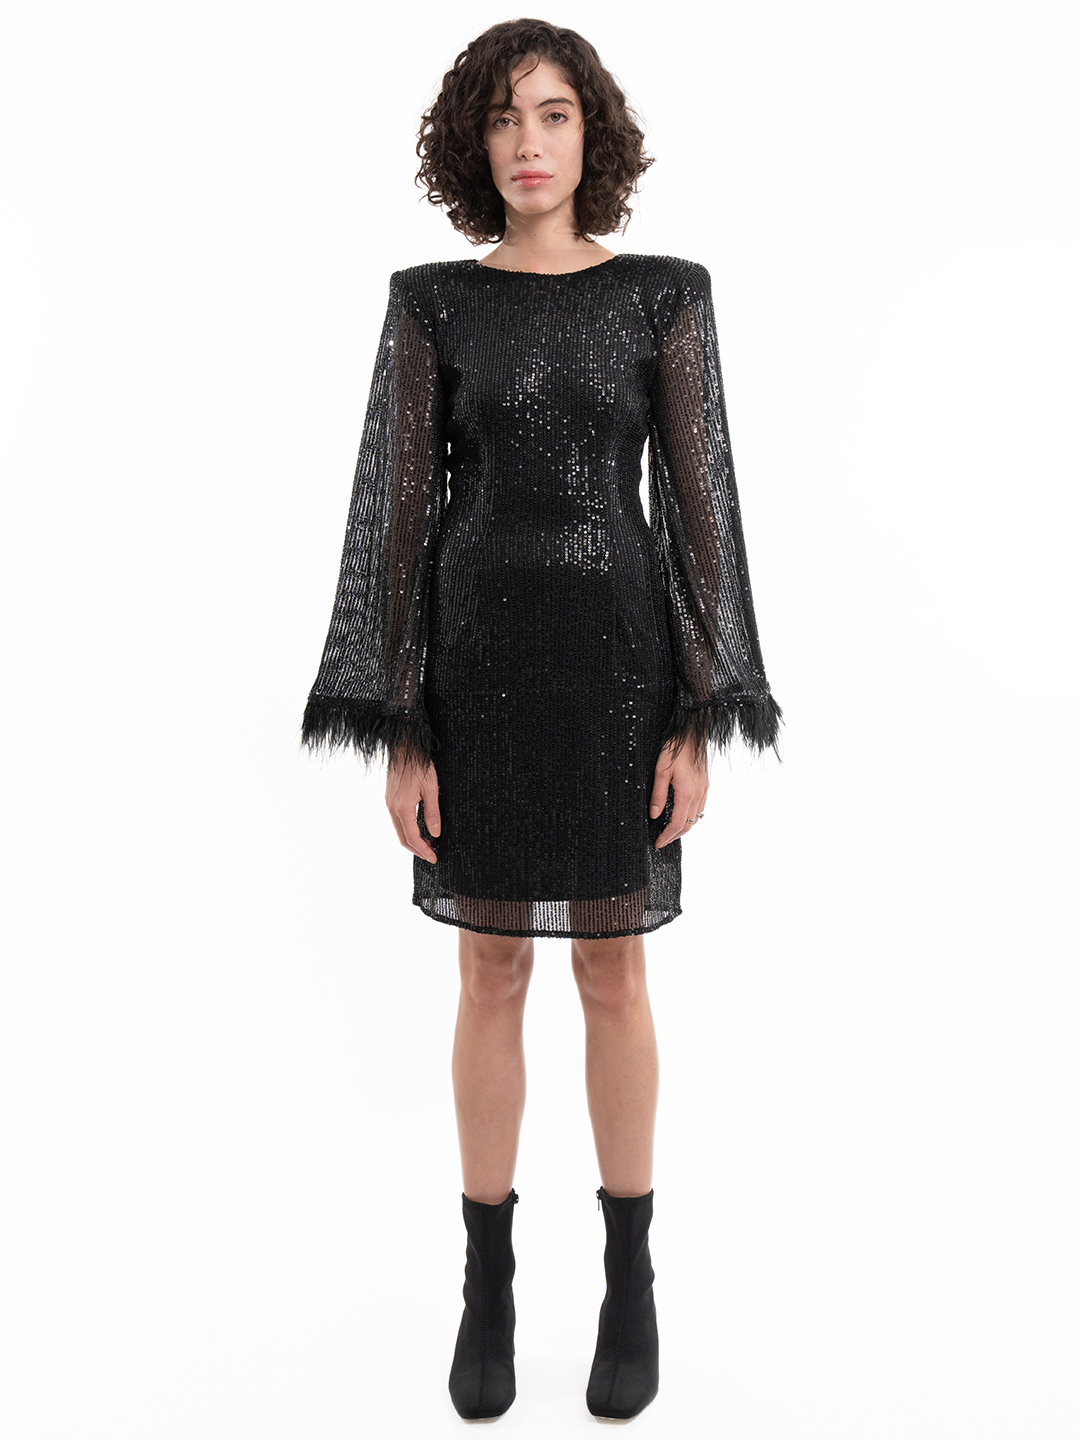 Celestial Sequence Chic Black Dress -1